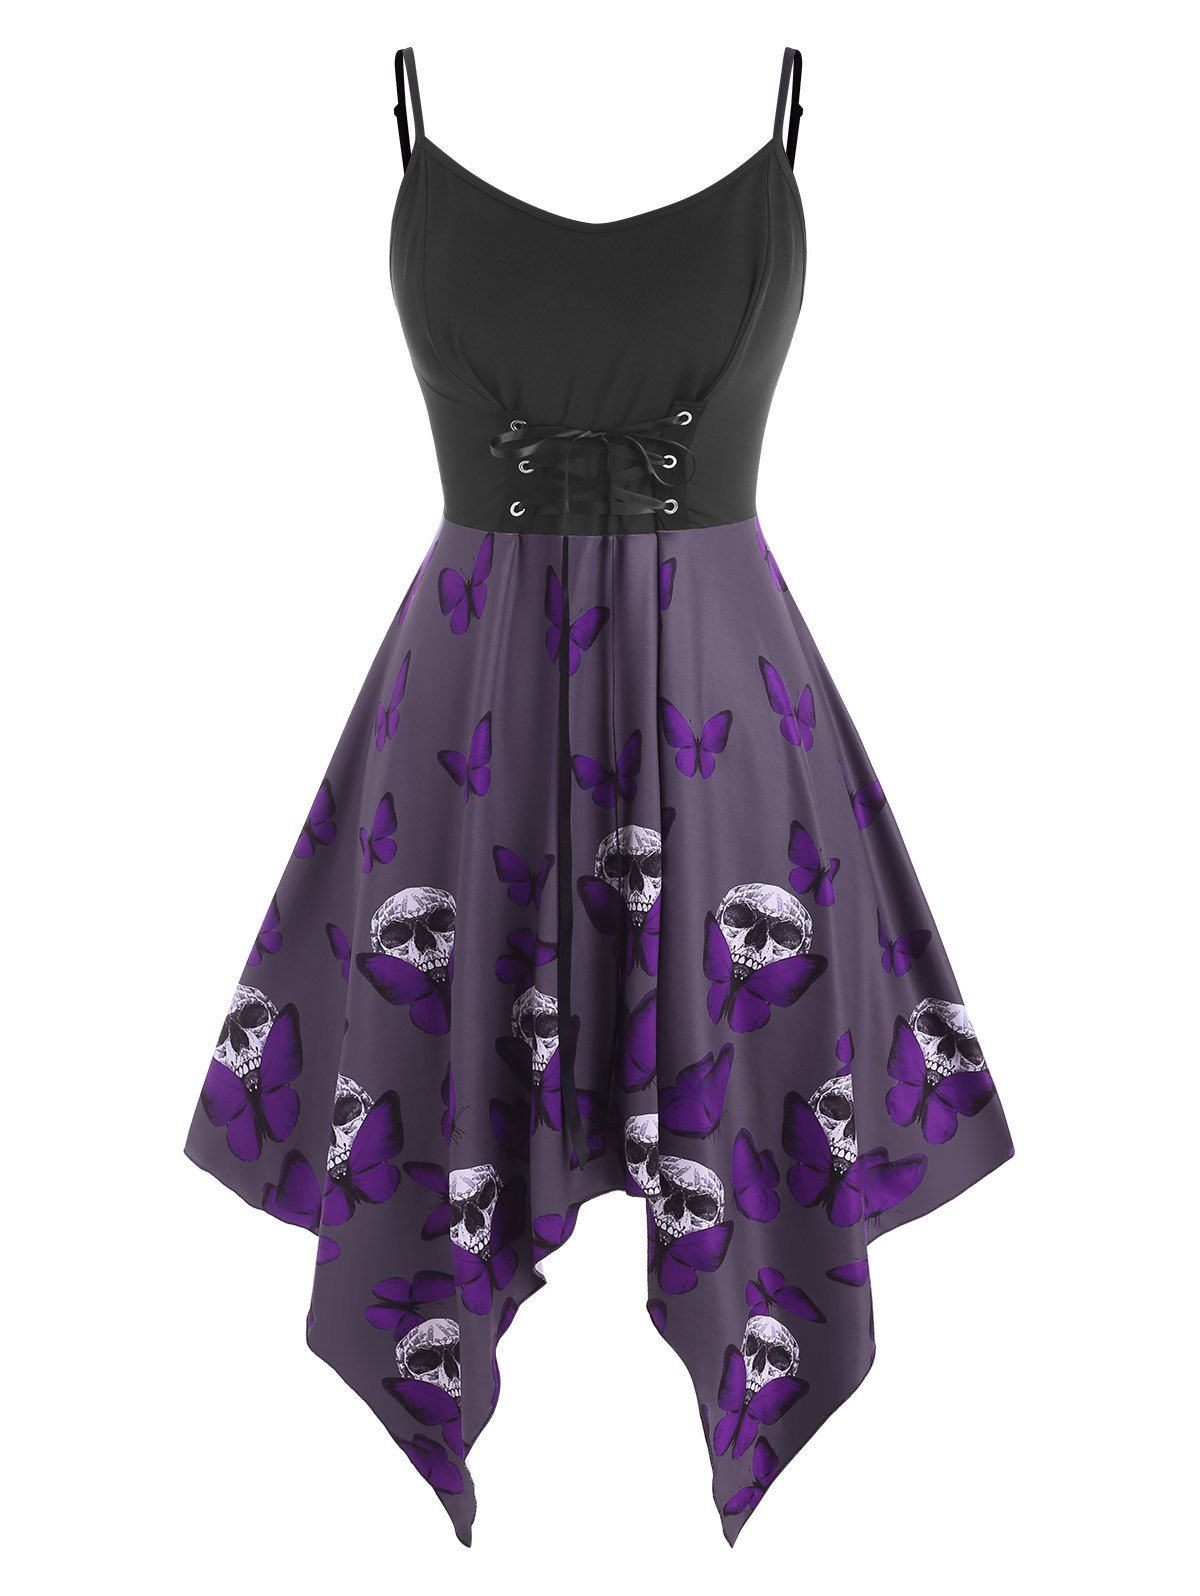 Lace Up Butterfly Skull Halloween Plus Size Cami Dress - PURPLE 4X